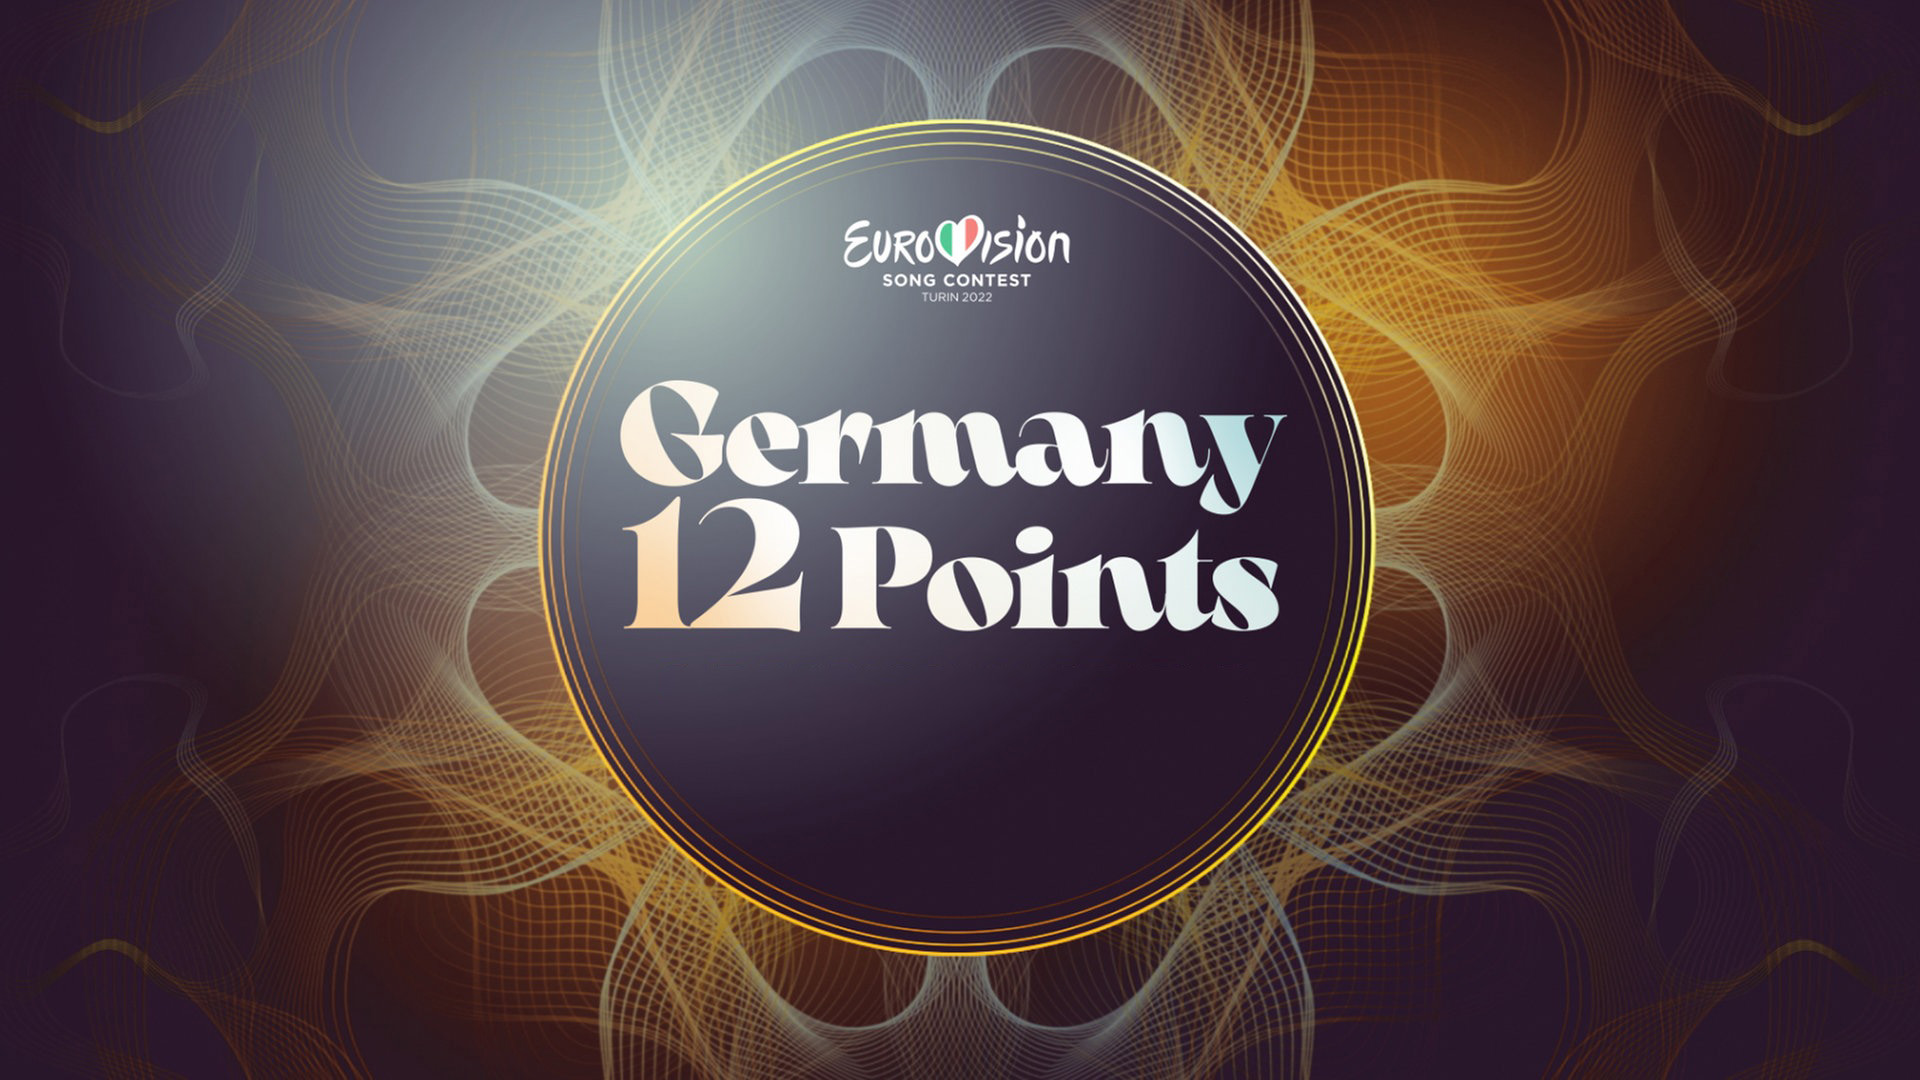 Germany: Start voting now for “Germany 12 Points”!